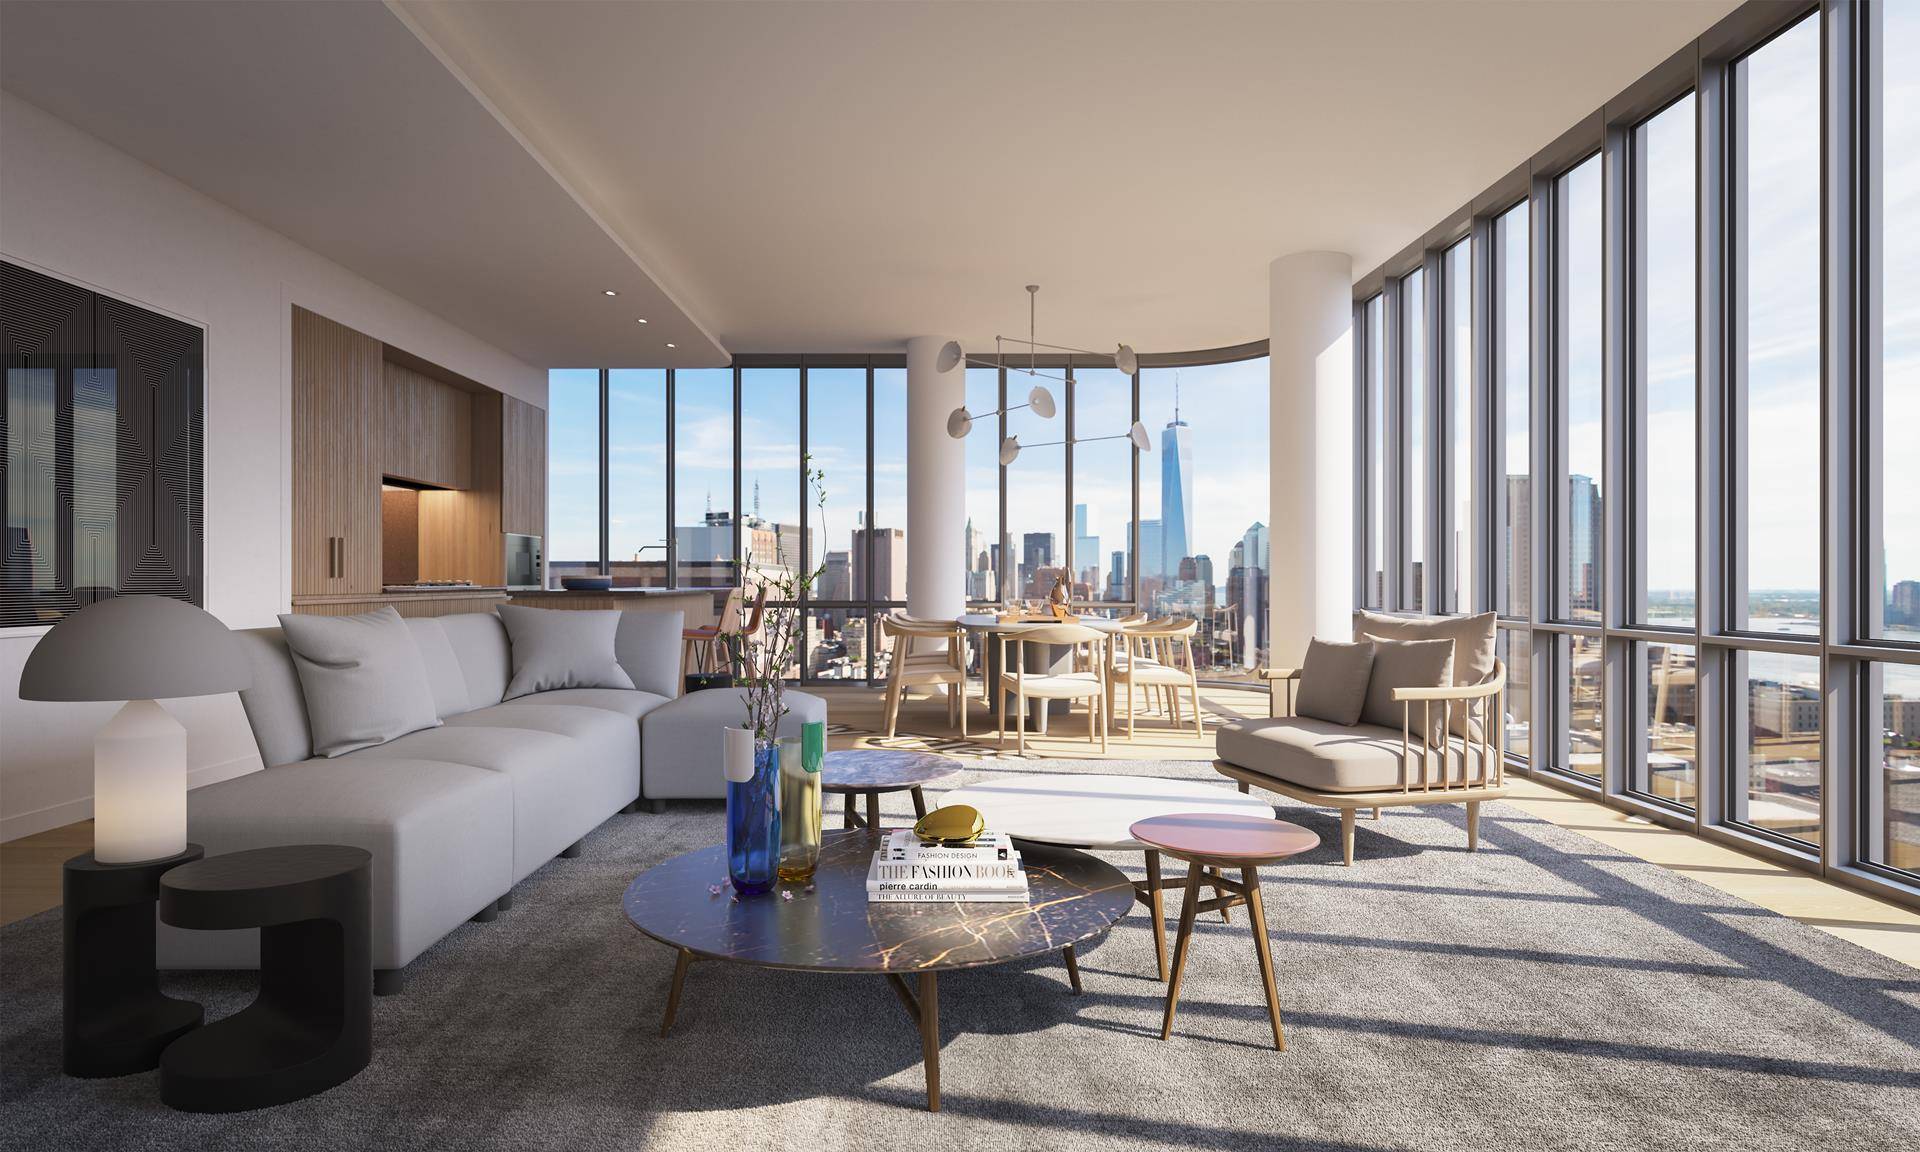 Unlike any other property in SoHo, 565 Broome SoHo offers the luxury and convenience of a private covered porte cochere with automated parking, expansive views and 17, 000 square feet ...